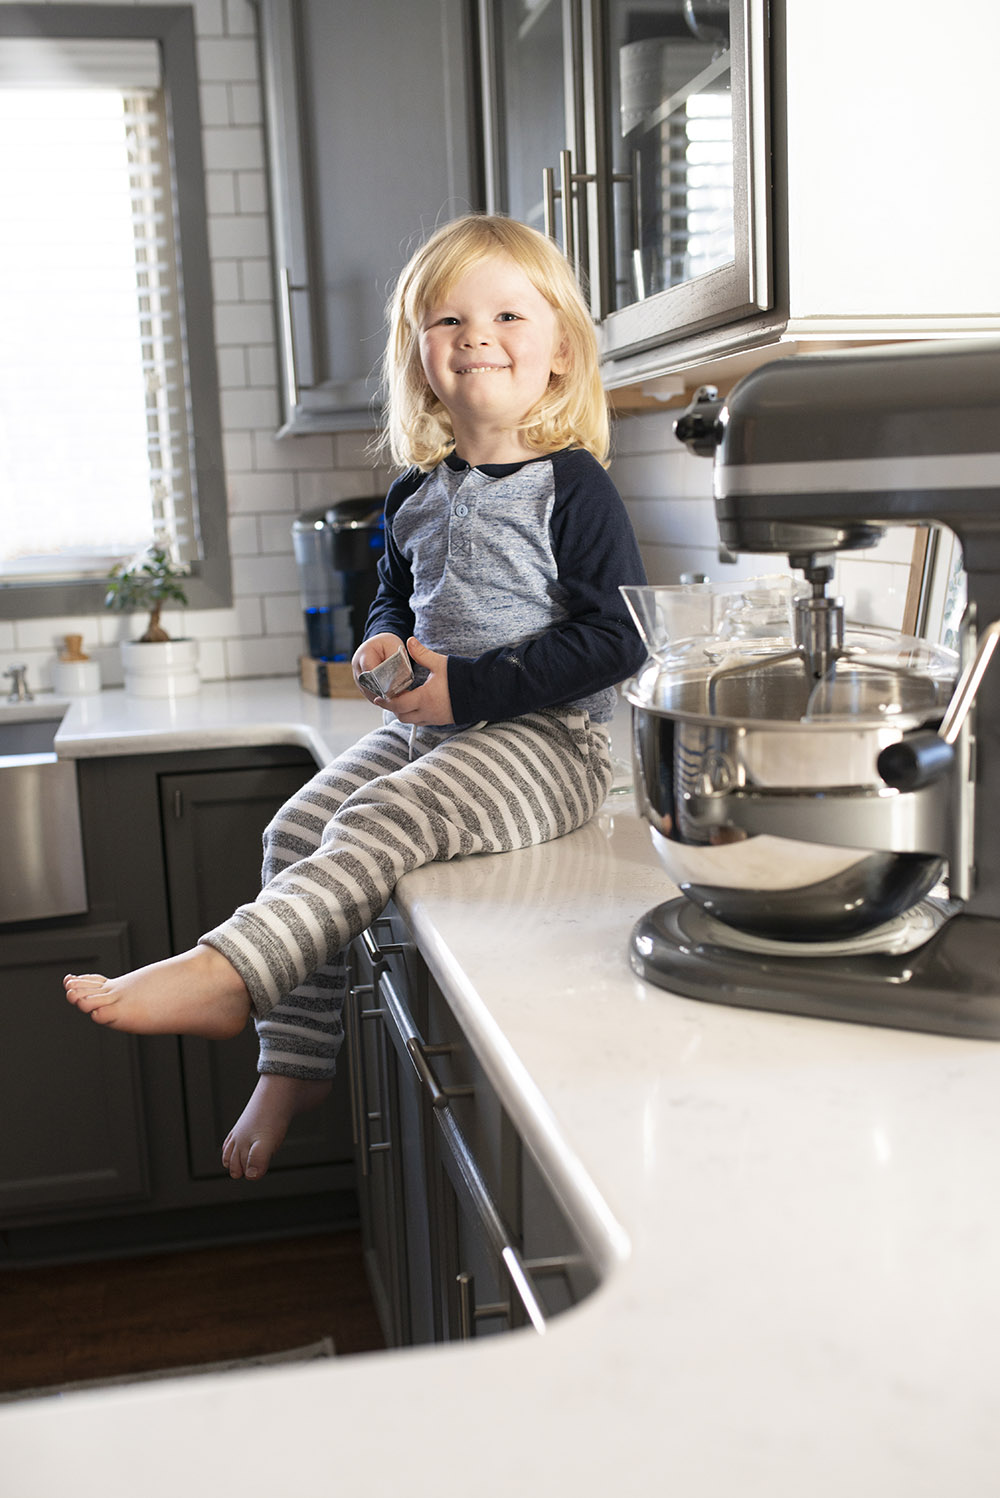 A young child sitting on a white kitchen countertop next to a KitchenAid stand mixer.